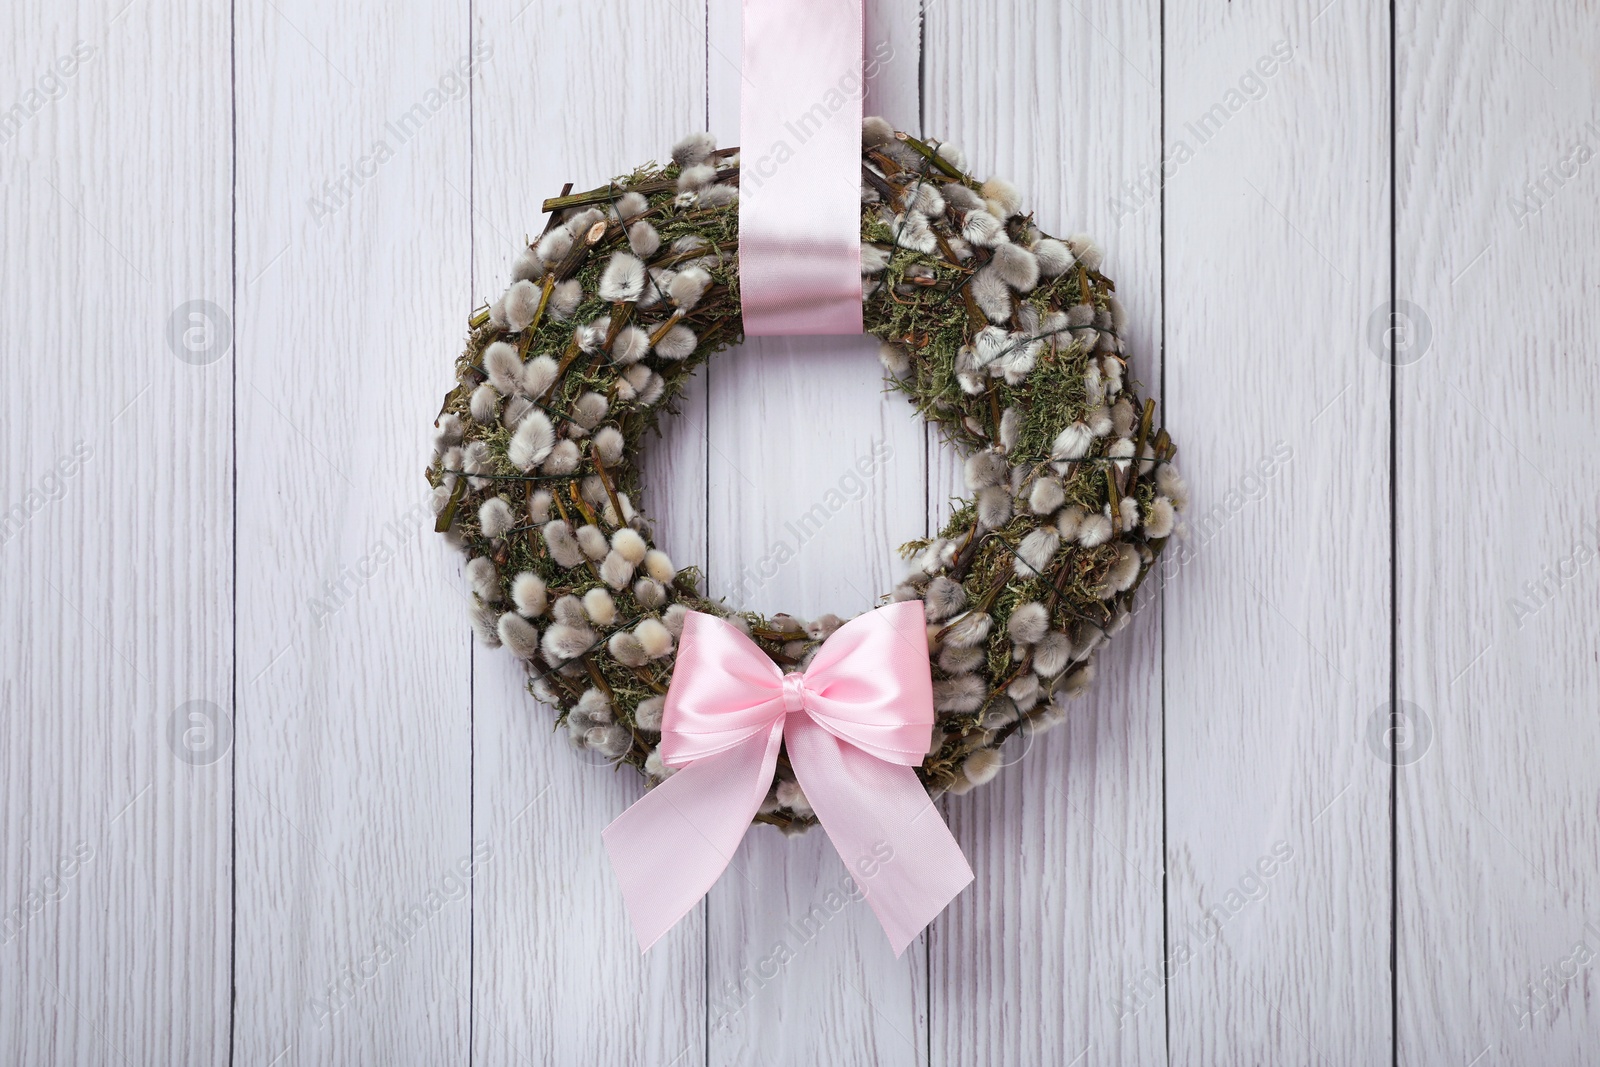 Photo of Wreath made of beautiful willow branches and pink bow hanging on white wooden background